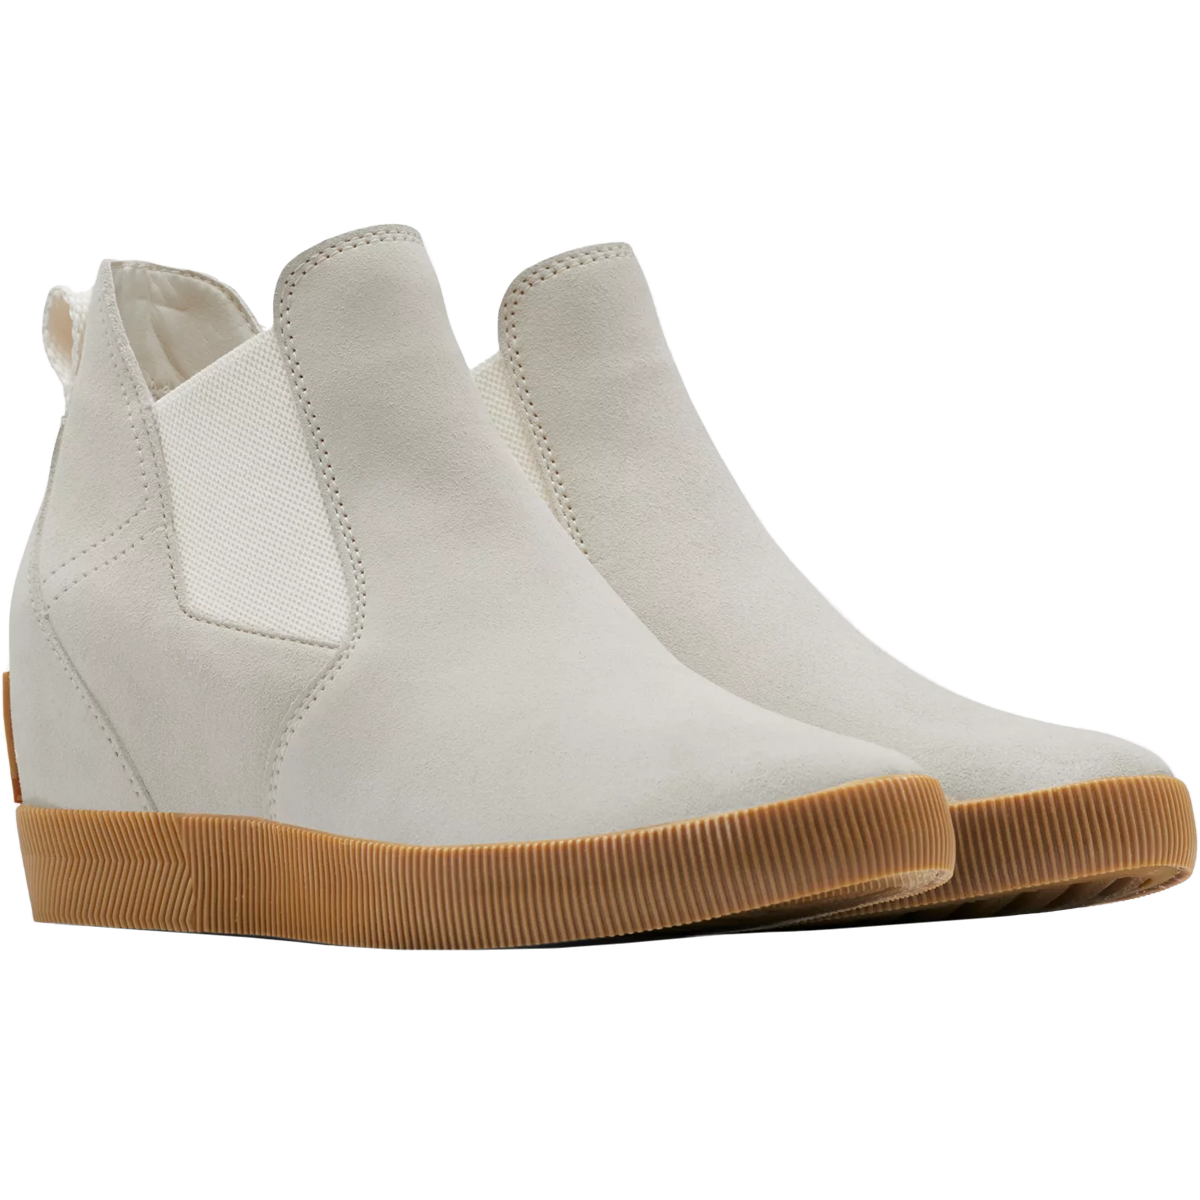 Women's Out N About Slip-On Wedge alternate view